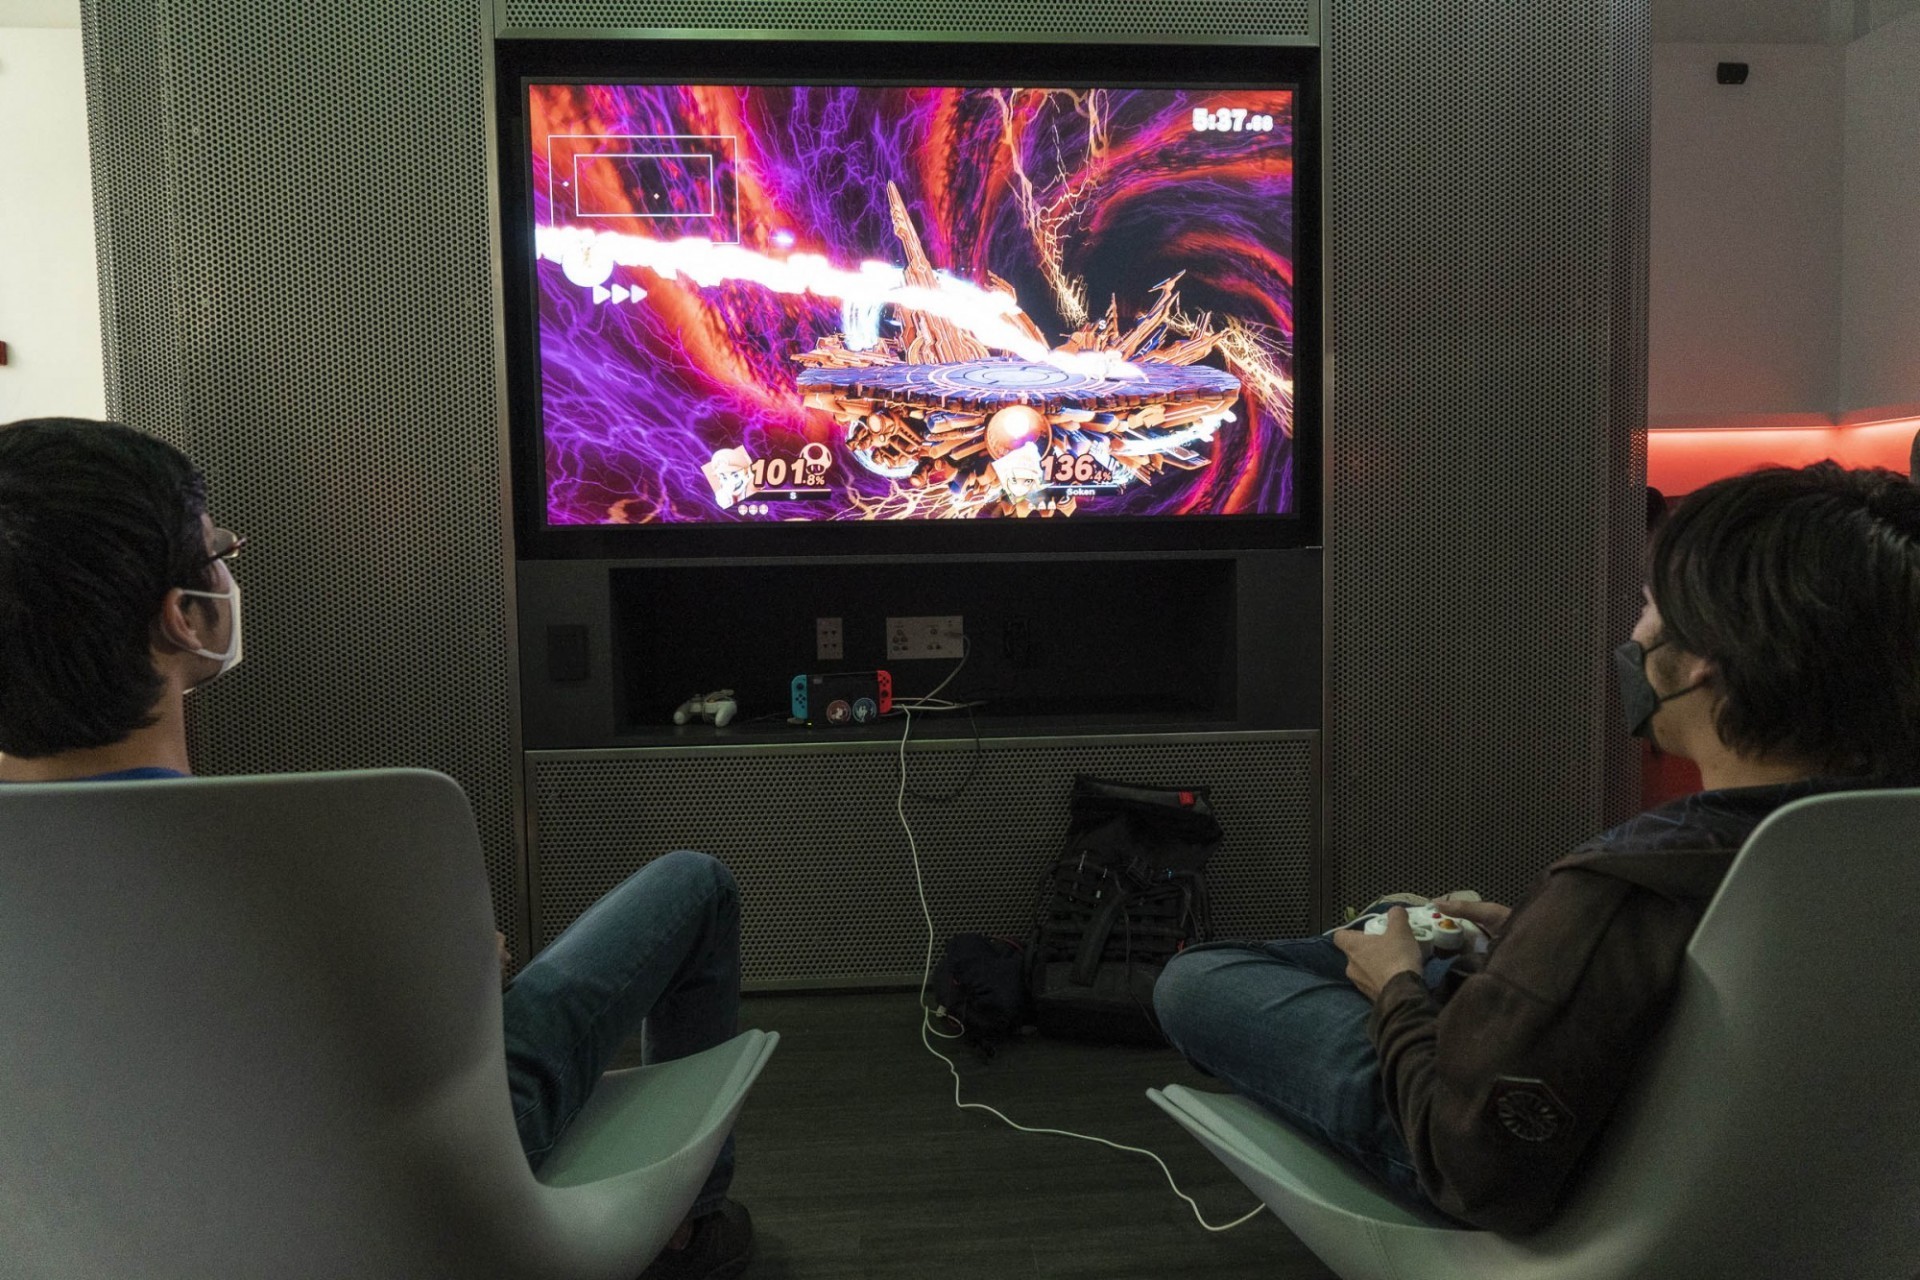 Students sit in high-backed chairs in front of a large screen playing video games in the ESPORTS room